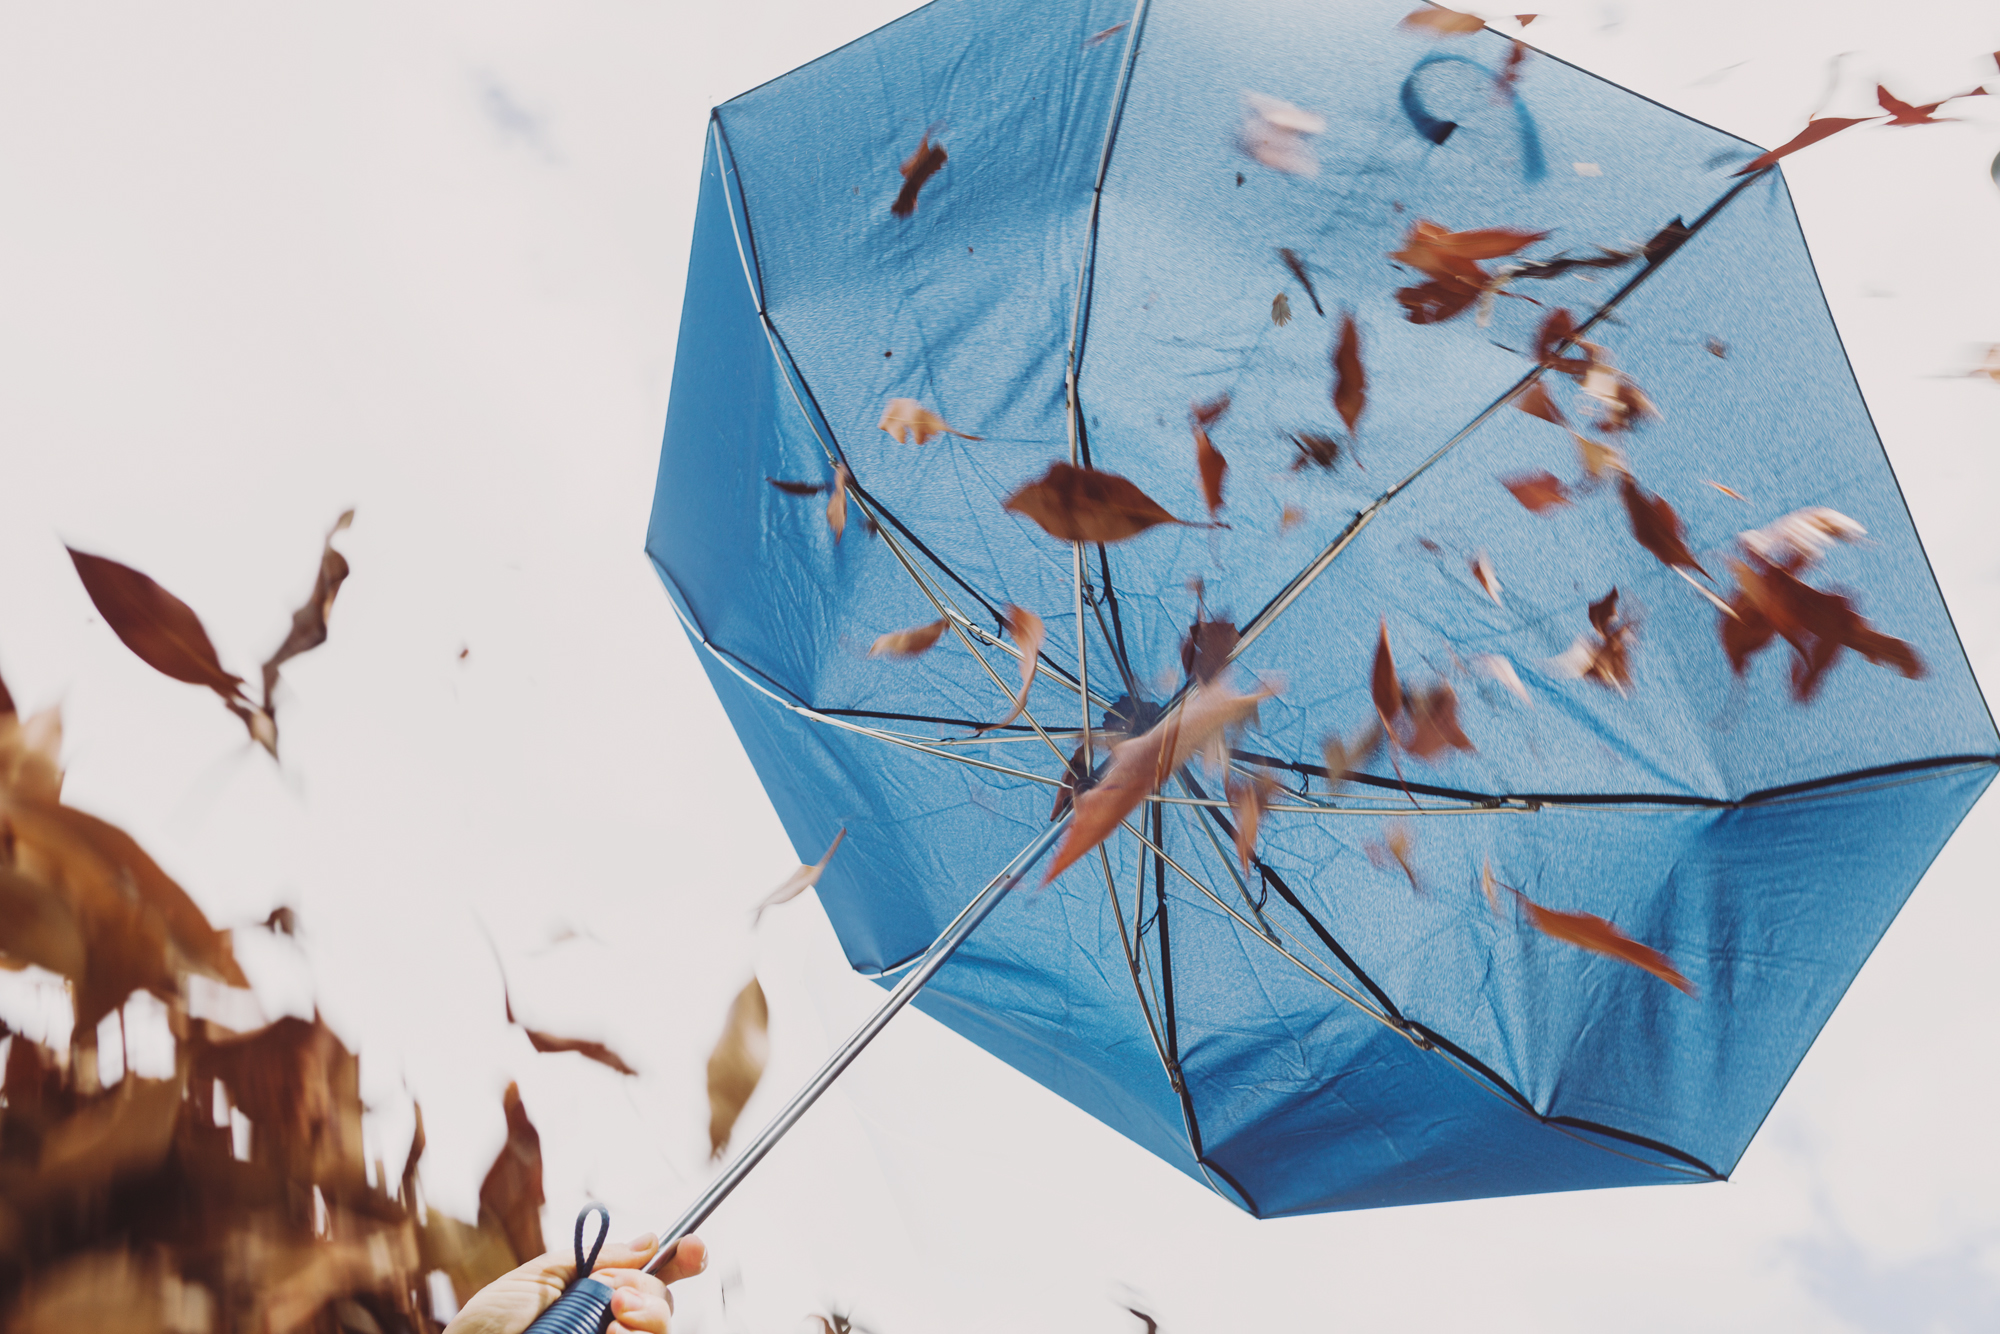 Windy-cloudy-sky-and-umbrella-symbolising-when-life-becomes-more-challenging